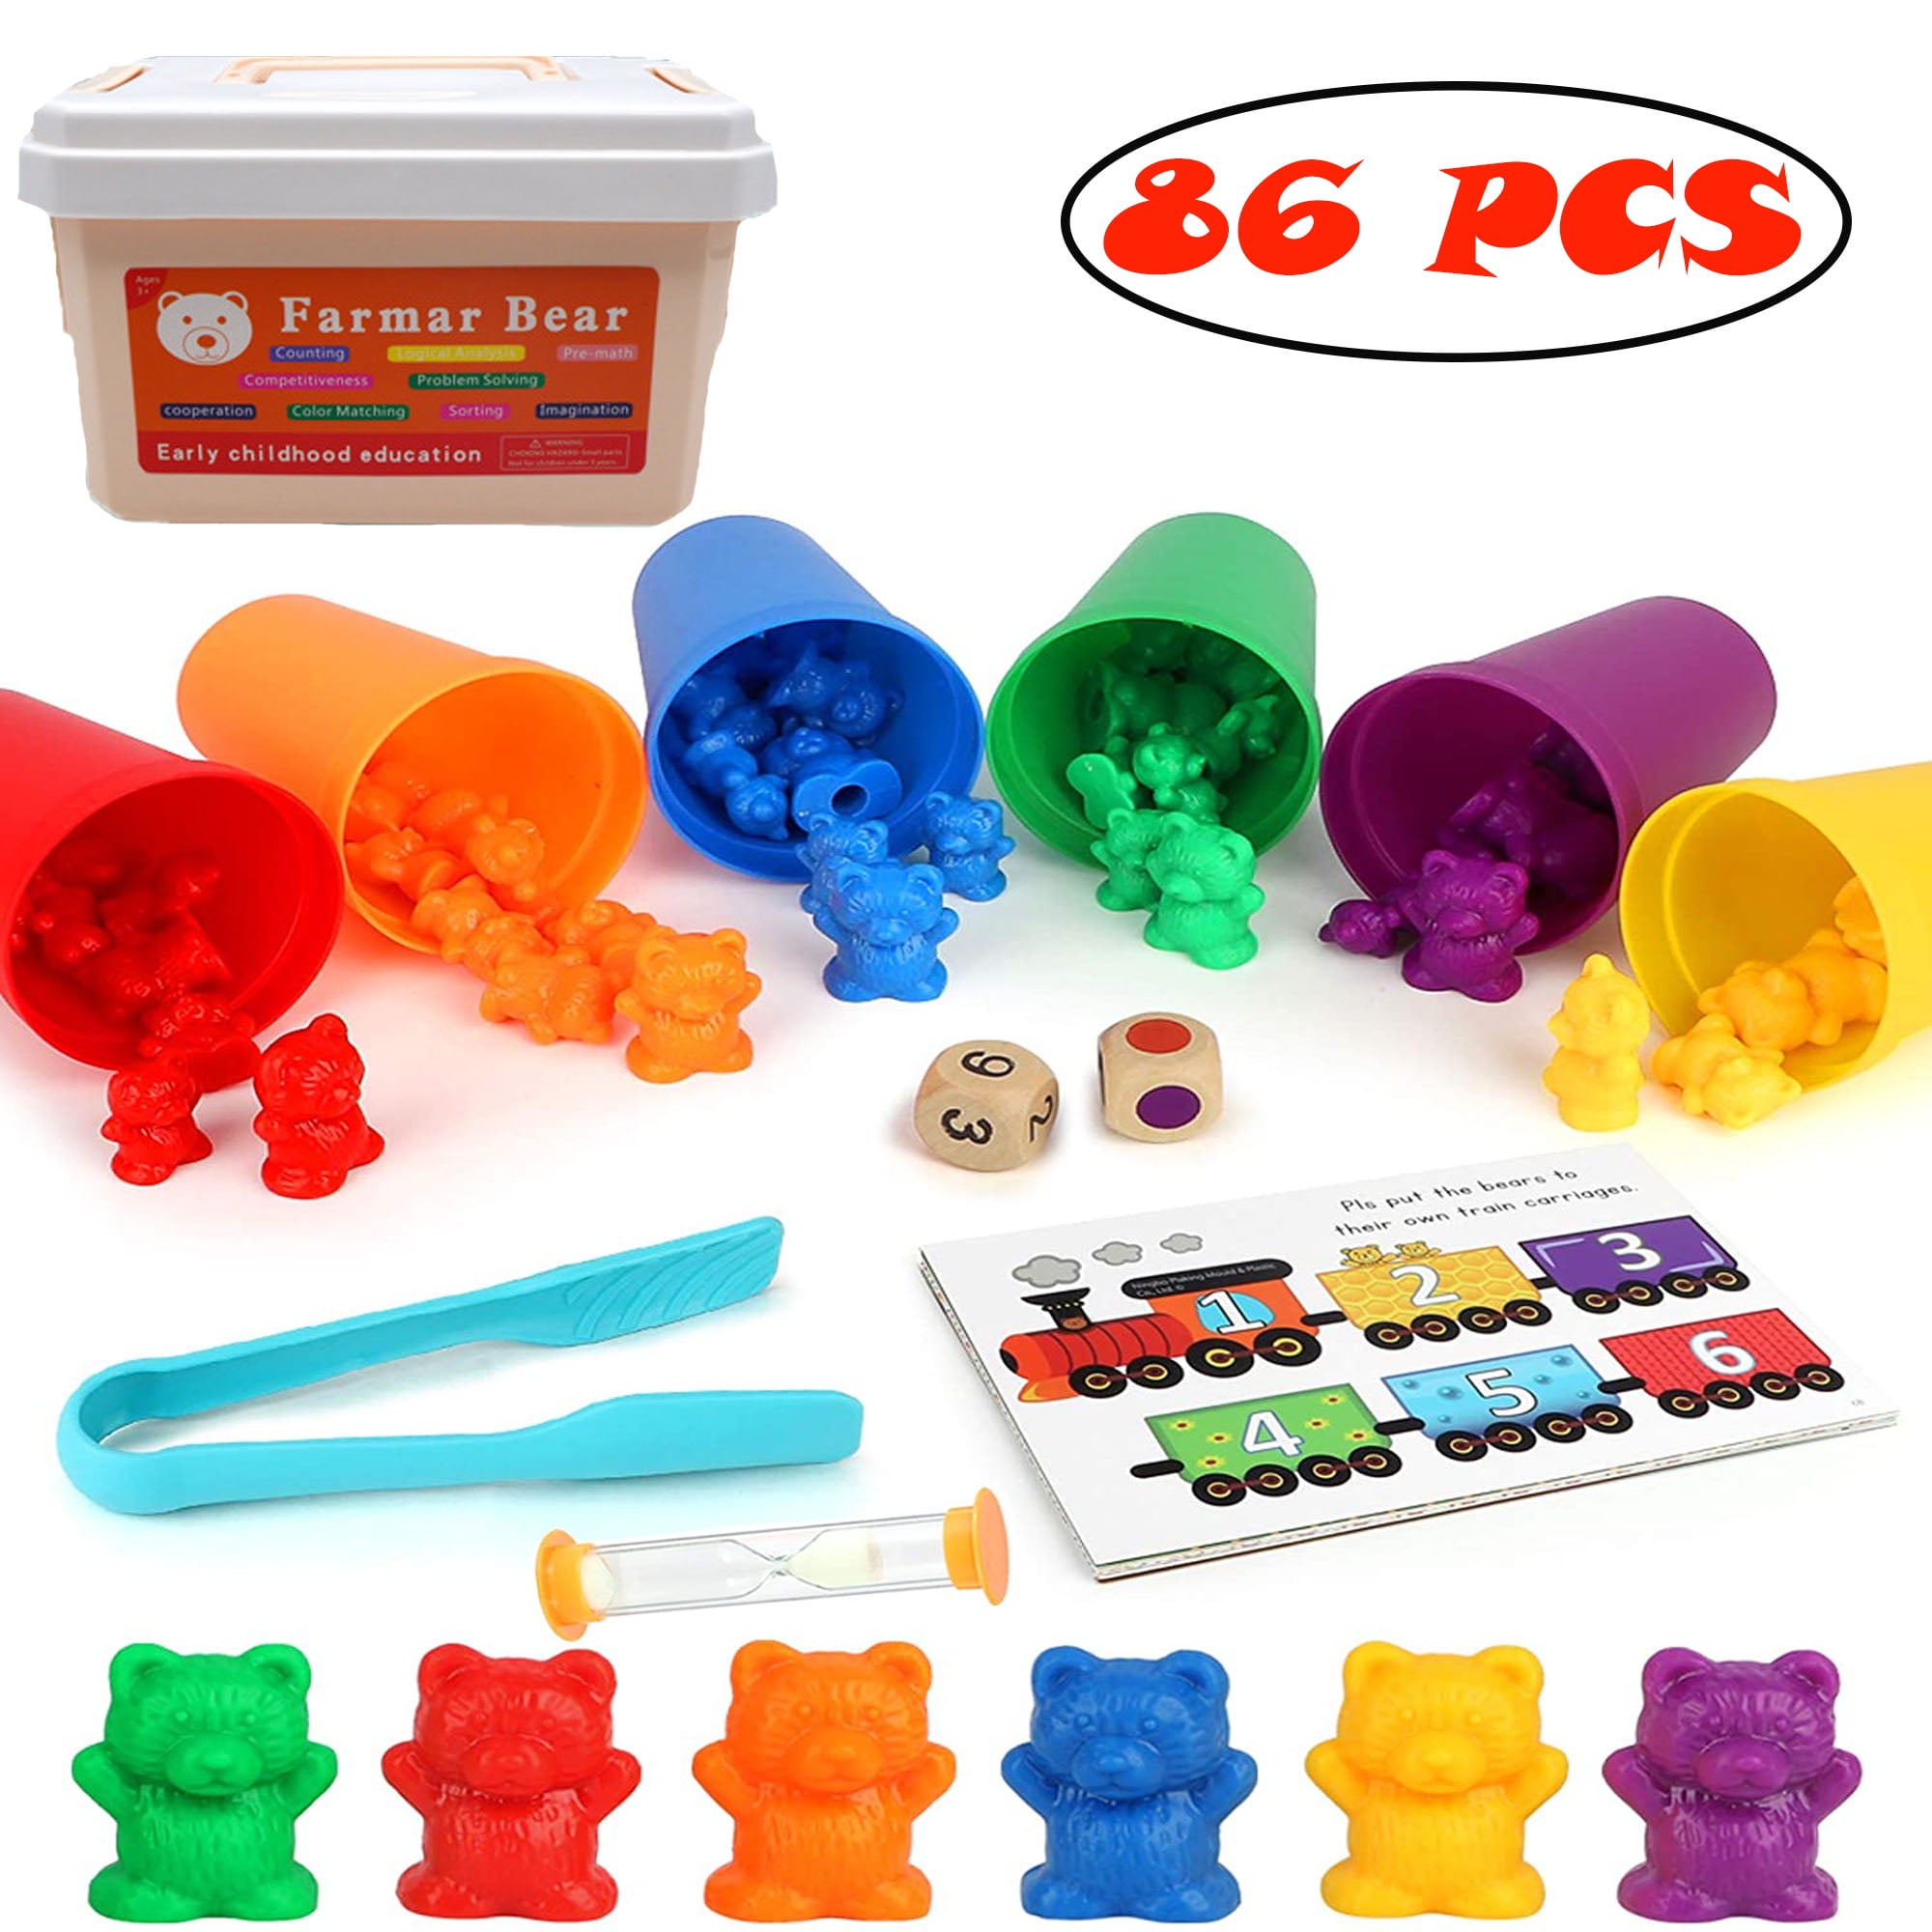 Counting Bears for Kids with Matching Sorting Cups, Rainbow Bear Counters  with Activity Cards and Storage Box, STEM Educational Counting and Sorting  